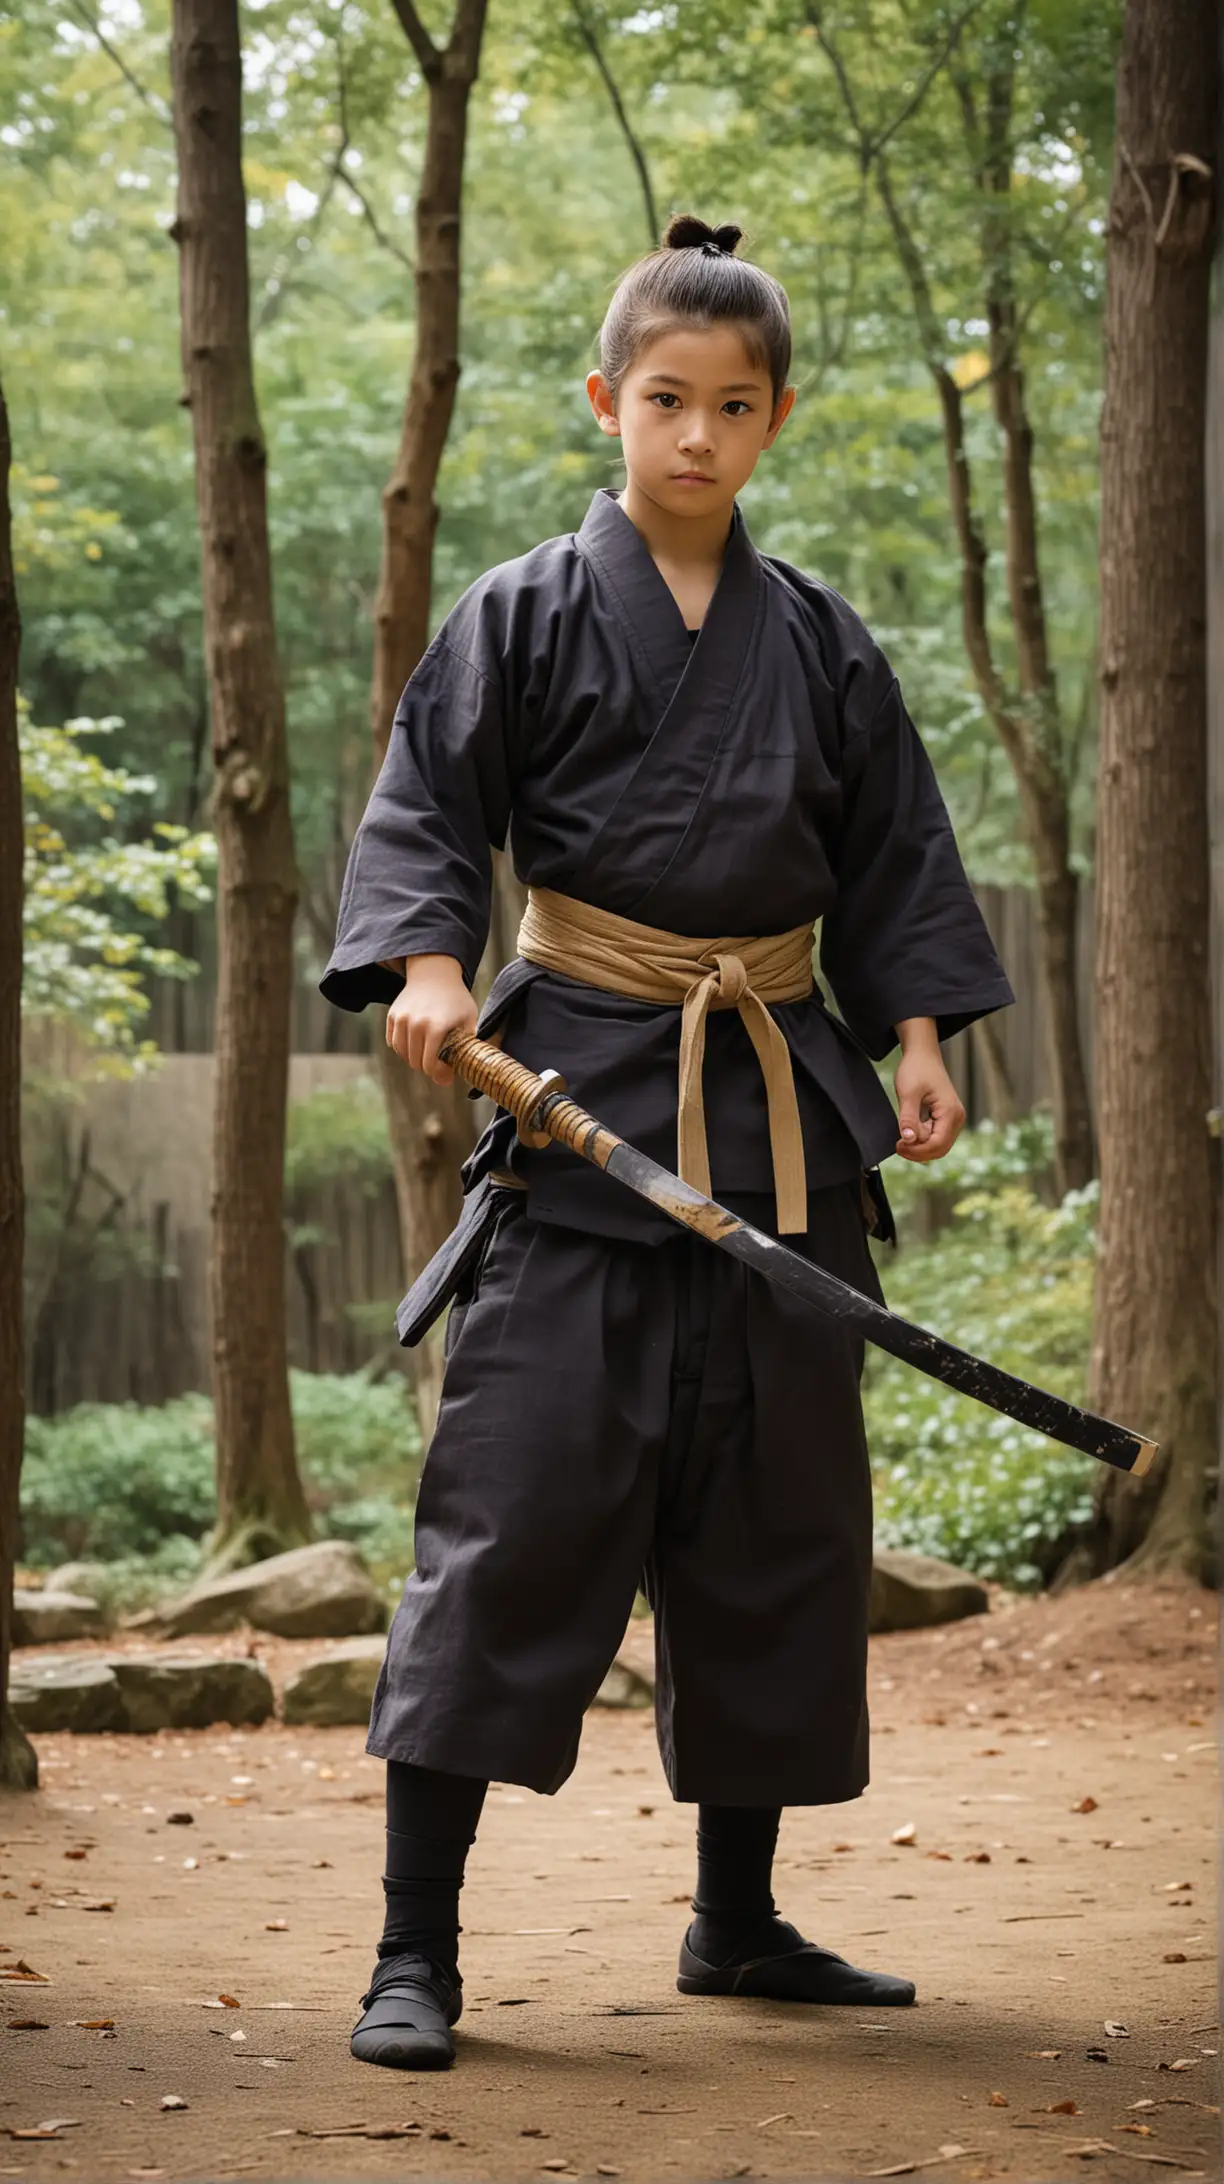 Young Samurai in Training: Illustrate a young samurai apprentice practicing with a wooden sword (bokken) under the guidance of an older, experienced samurai. The setting could be a dojo or a secluded outdoor area.